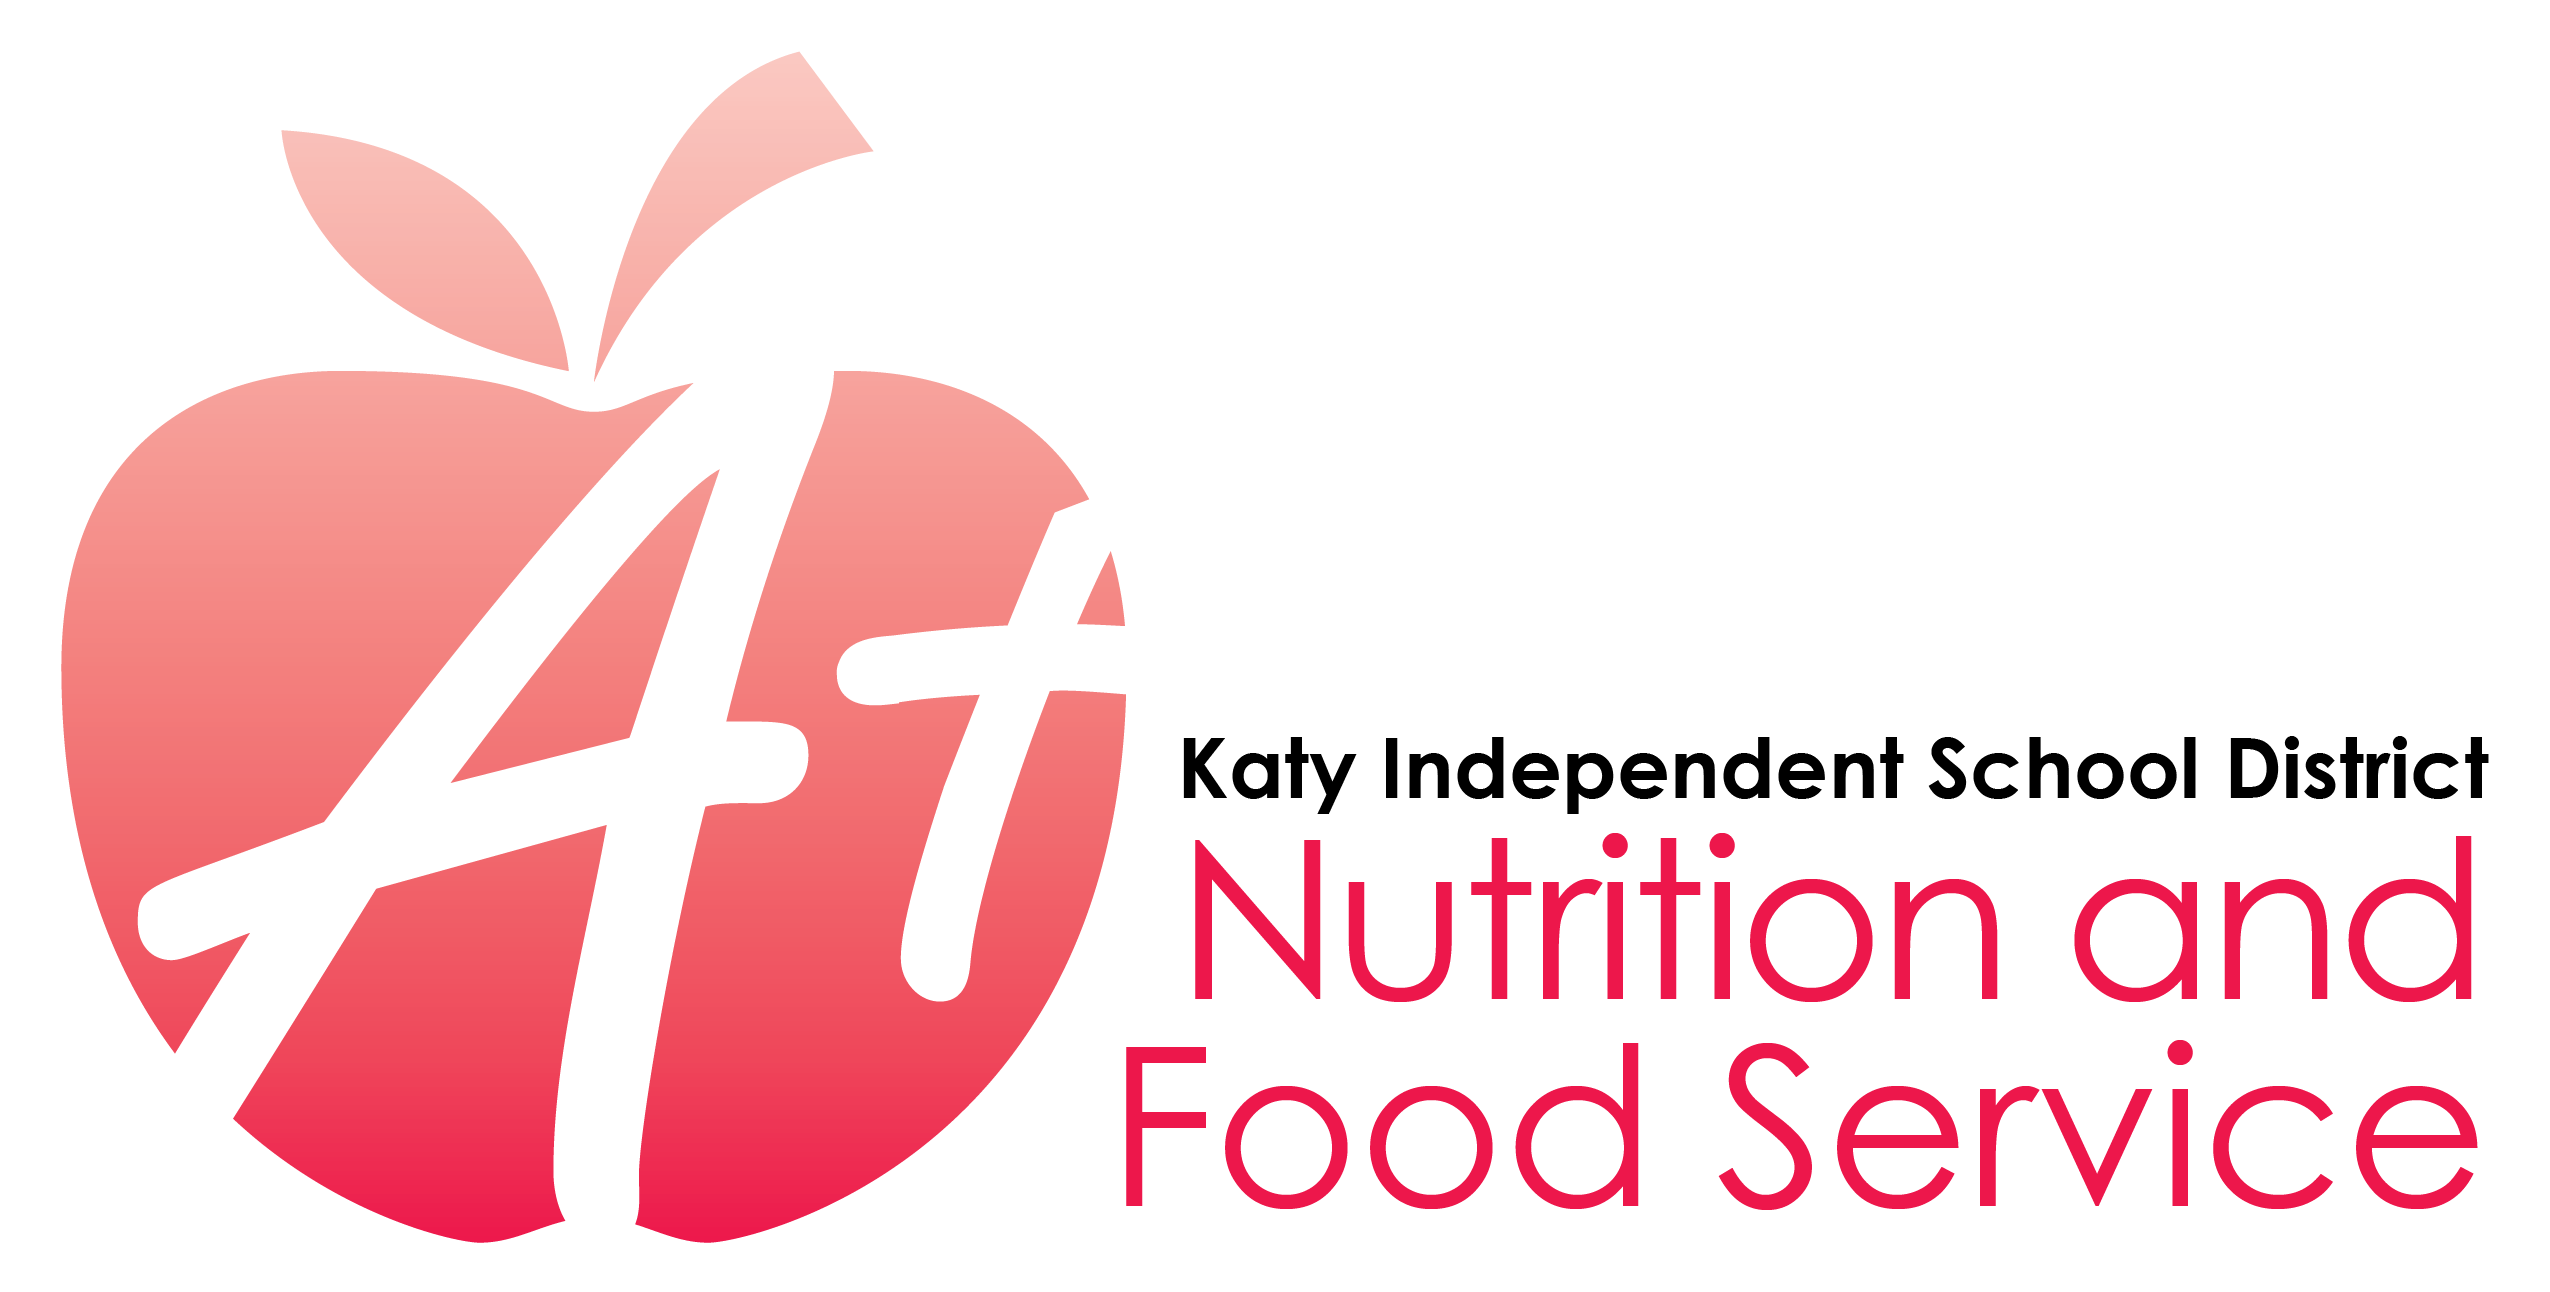 937.LO-Nutriton and Food Service-01 - for Microsoft Office (word, excel, letterhead etc).png